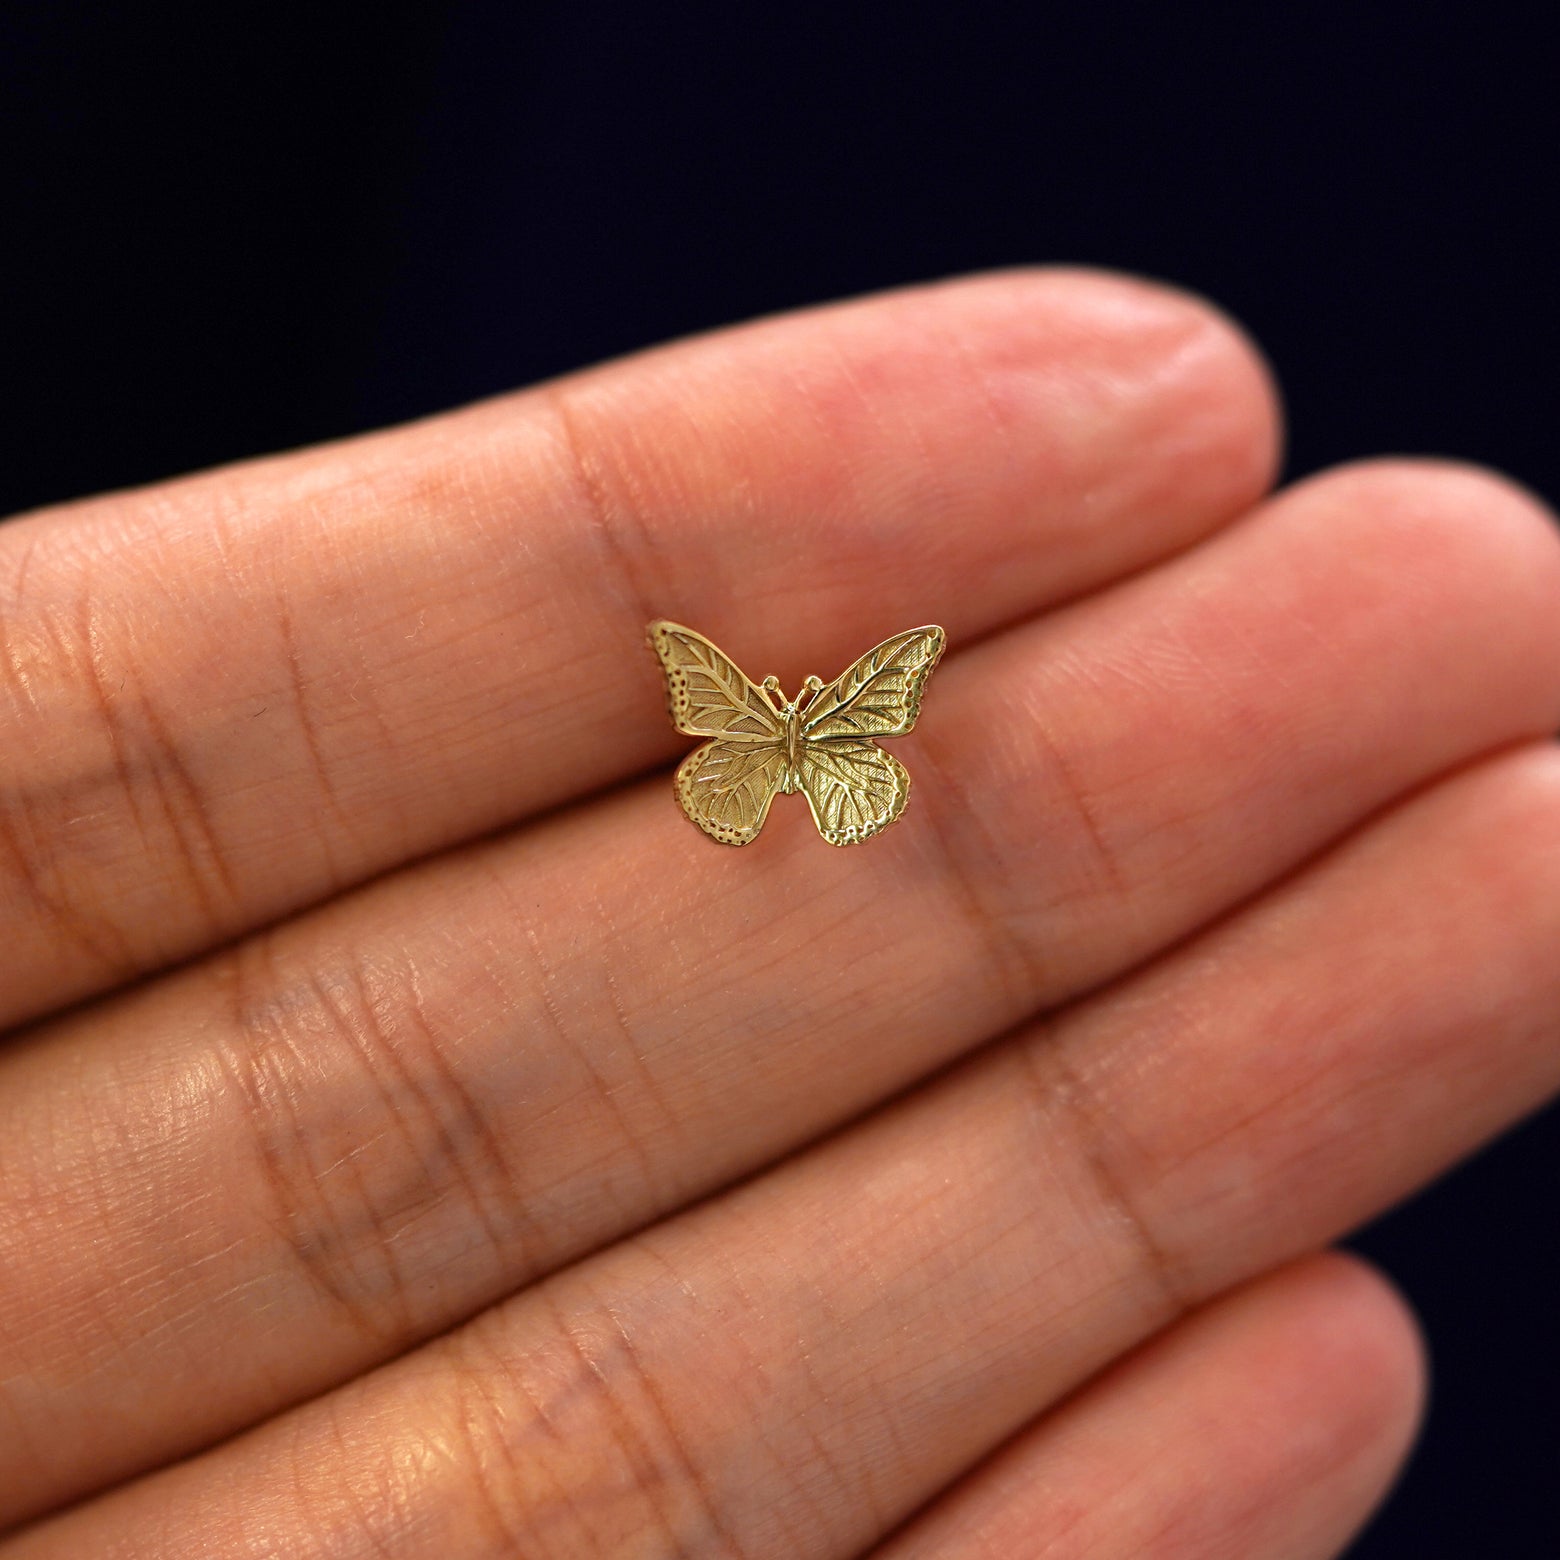 A solid 14k yellow gold Butterfly Earring in between a model's fingers